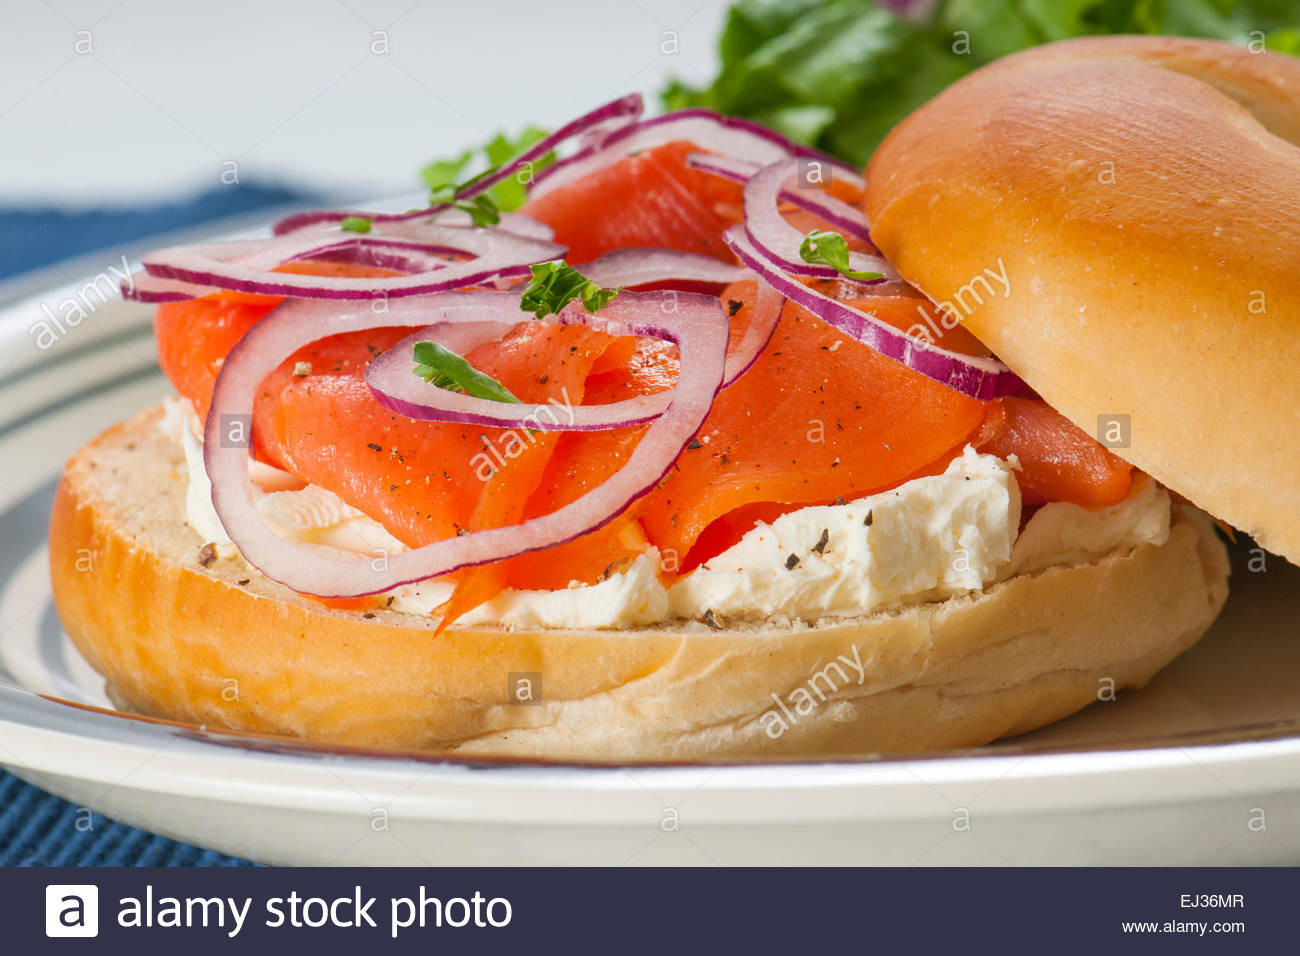 Smoked Salmon Cream Cheese Bagel
 Bagel with Smoked Salmon Lox cream cheese and red onion